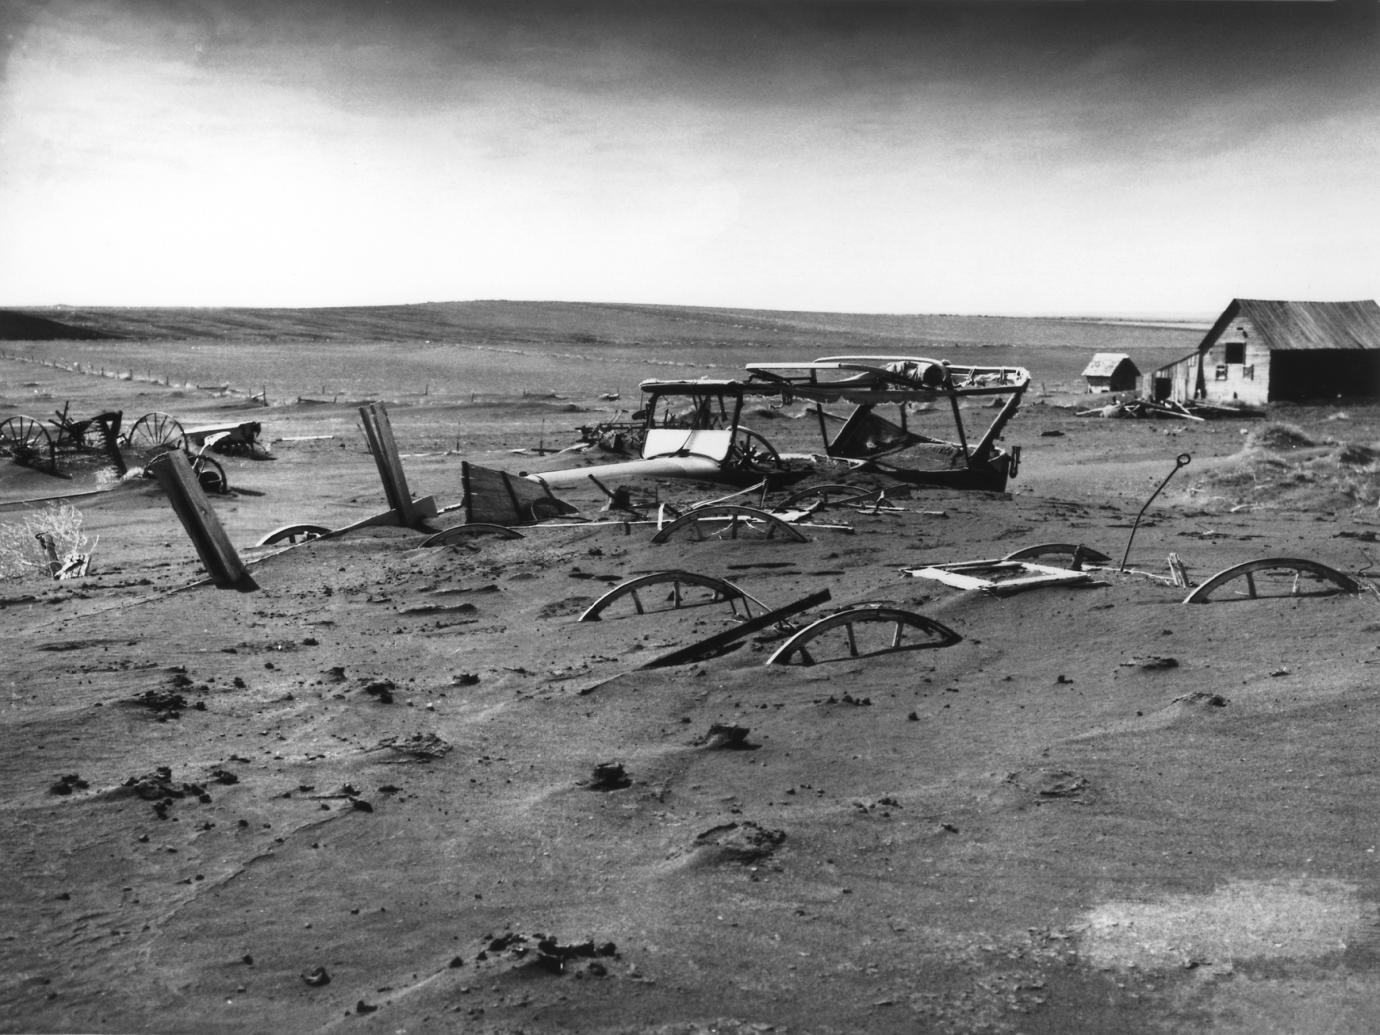 Images That Capture The Desolate Life Of Those Living In The Dust Bowl.